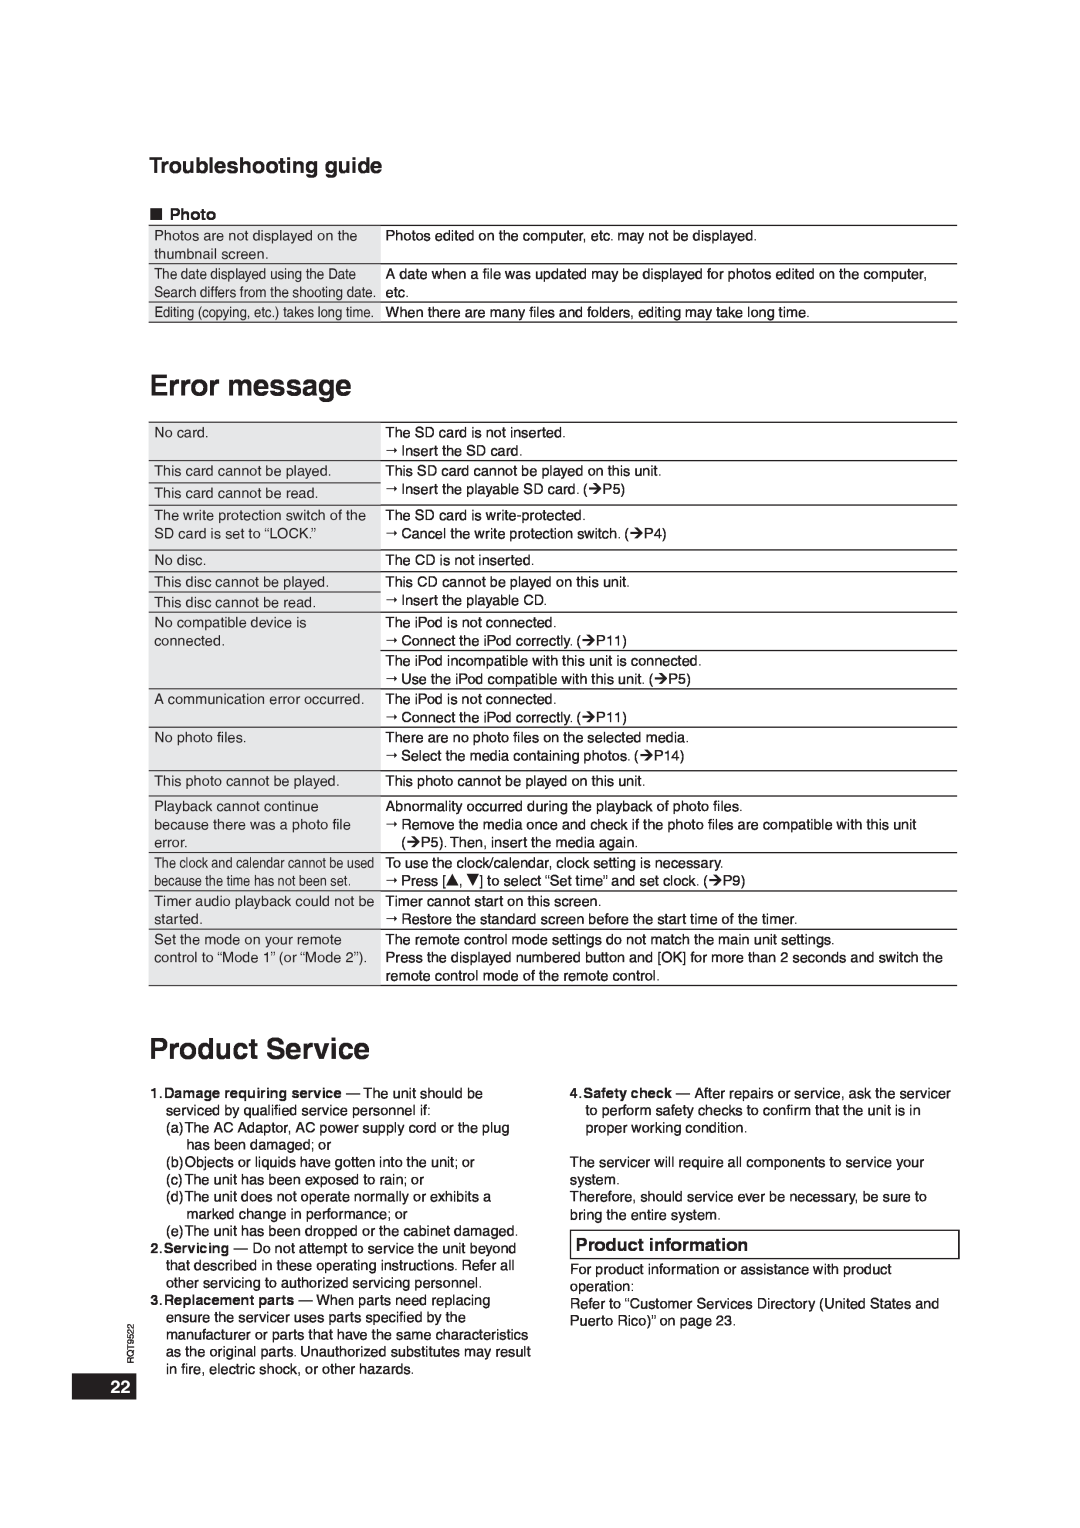 Panasonic MW-10 operating instructions Error message, Product Service, Troubleshooting guide, Product information, „ Photo 